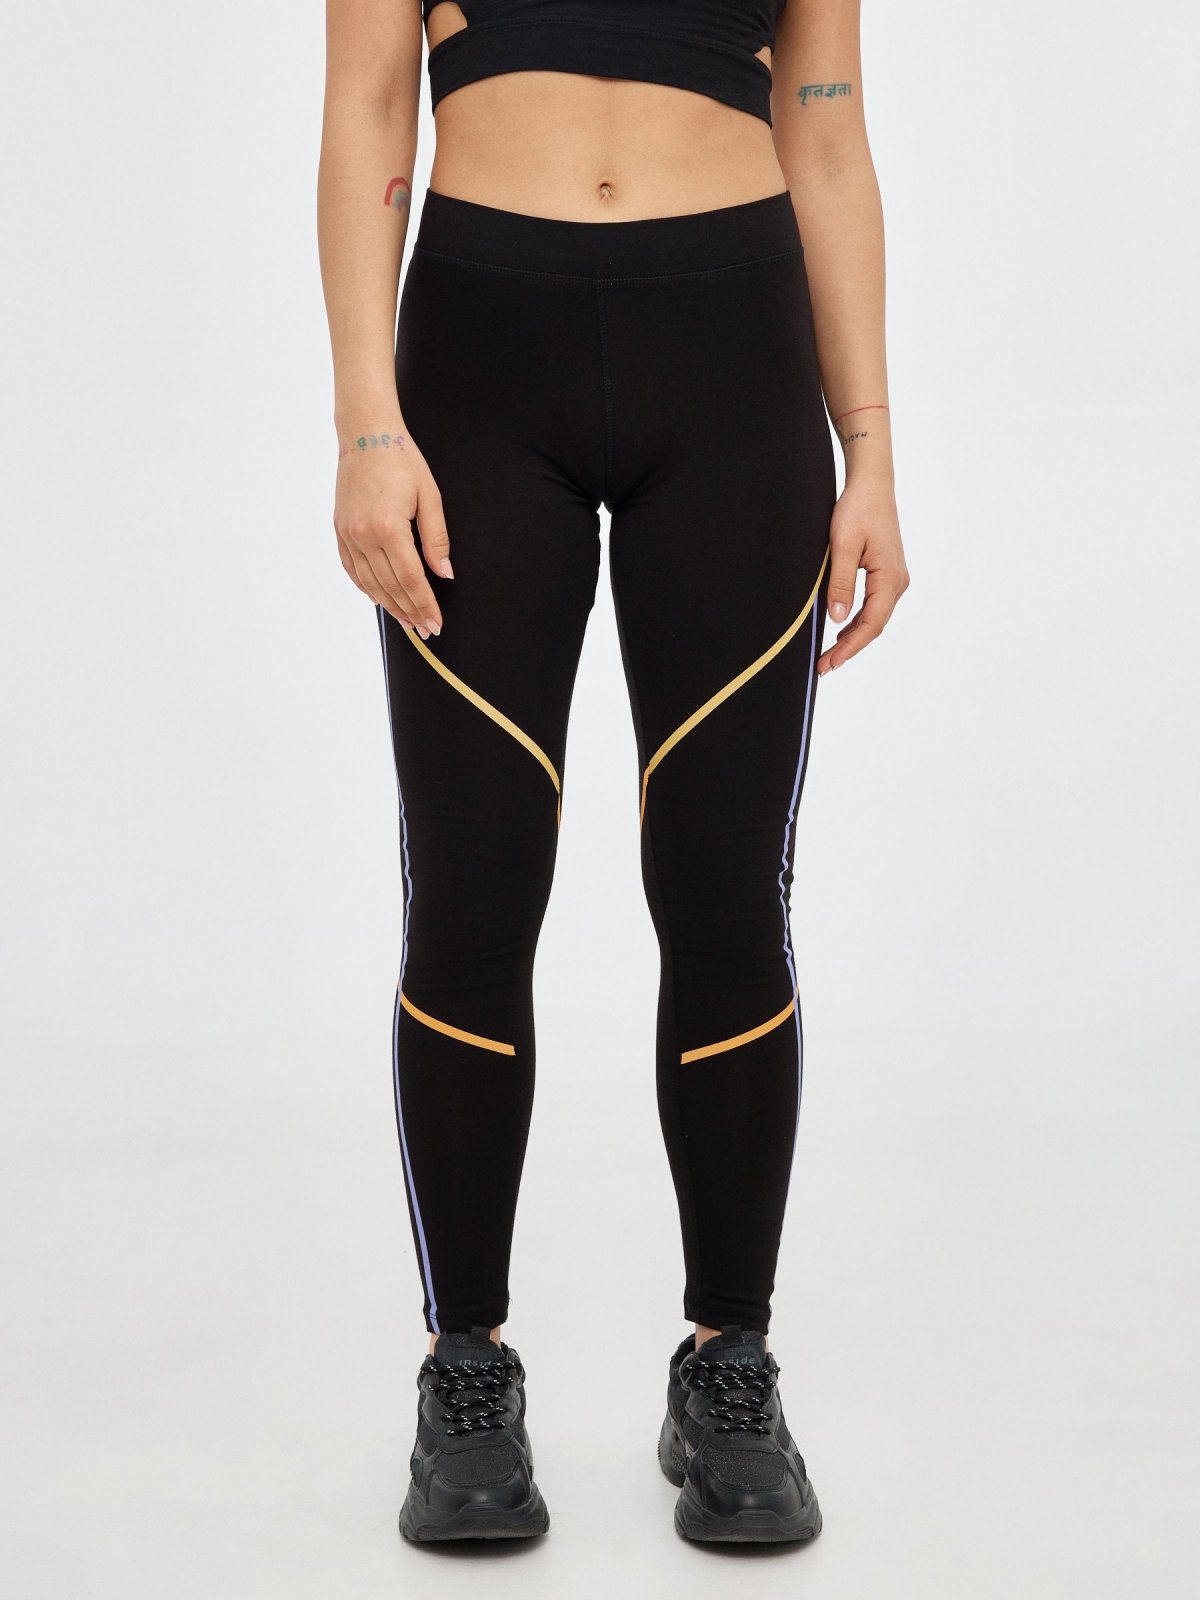 Legging sport graphics black middle front view